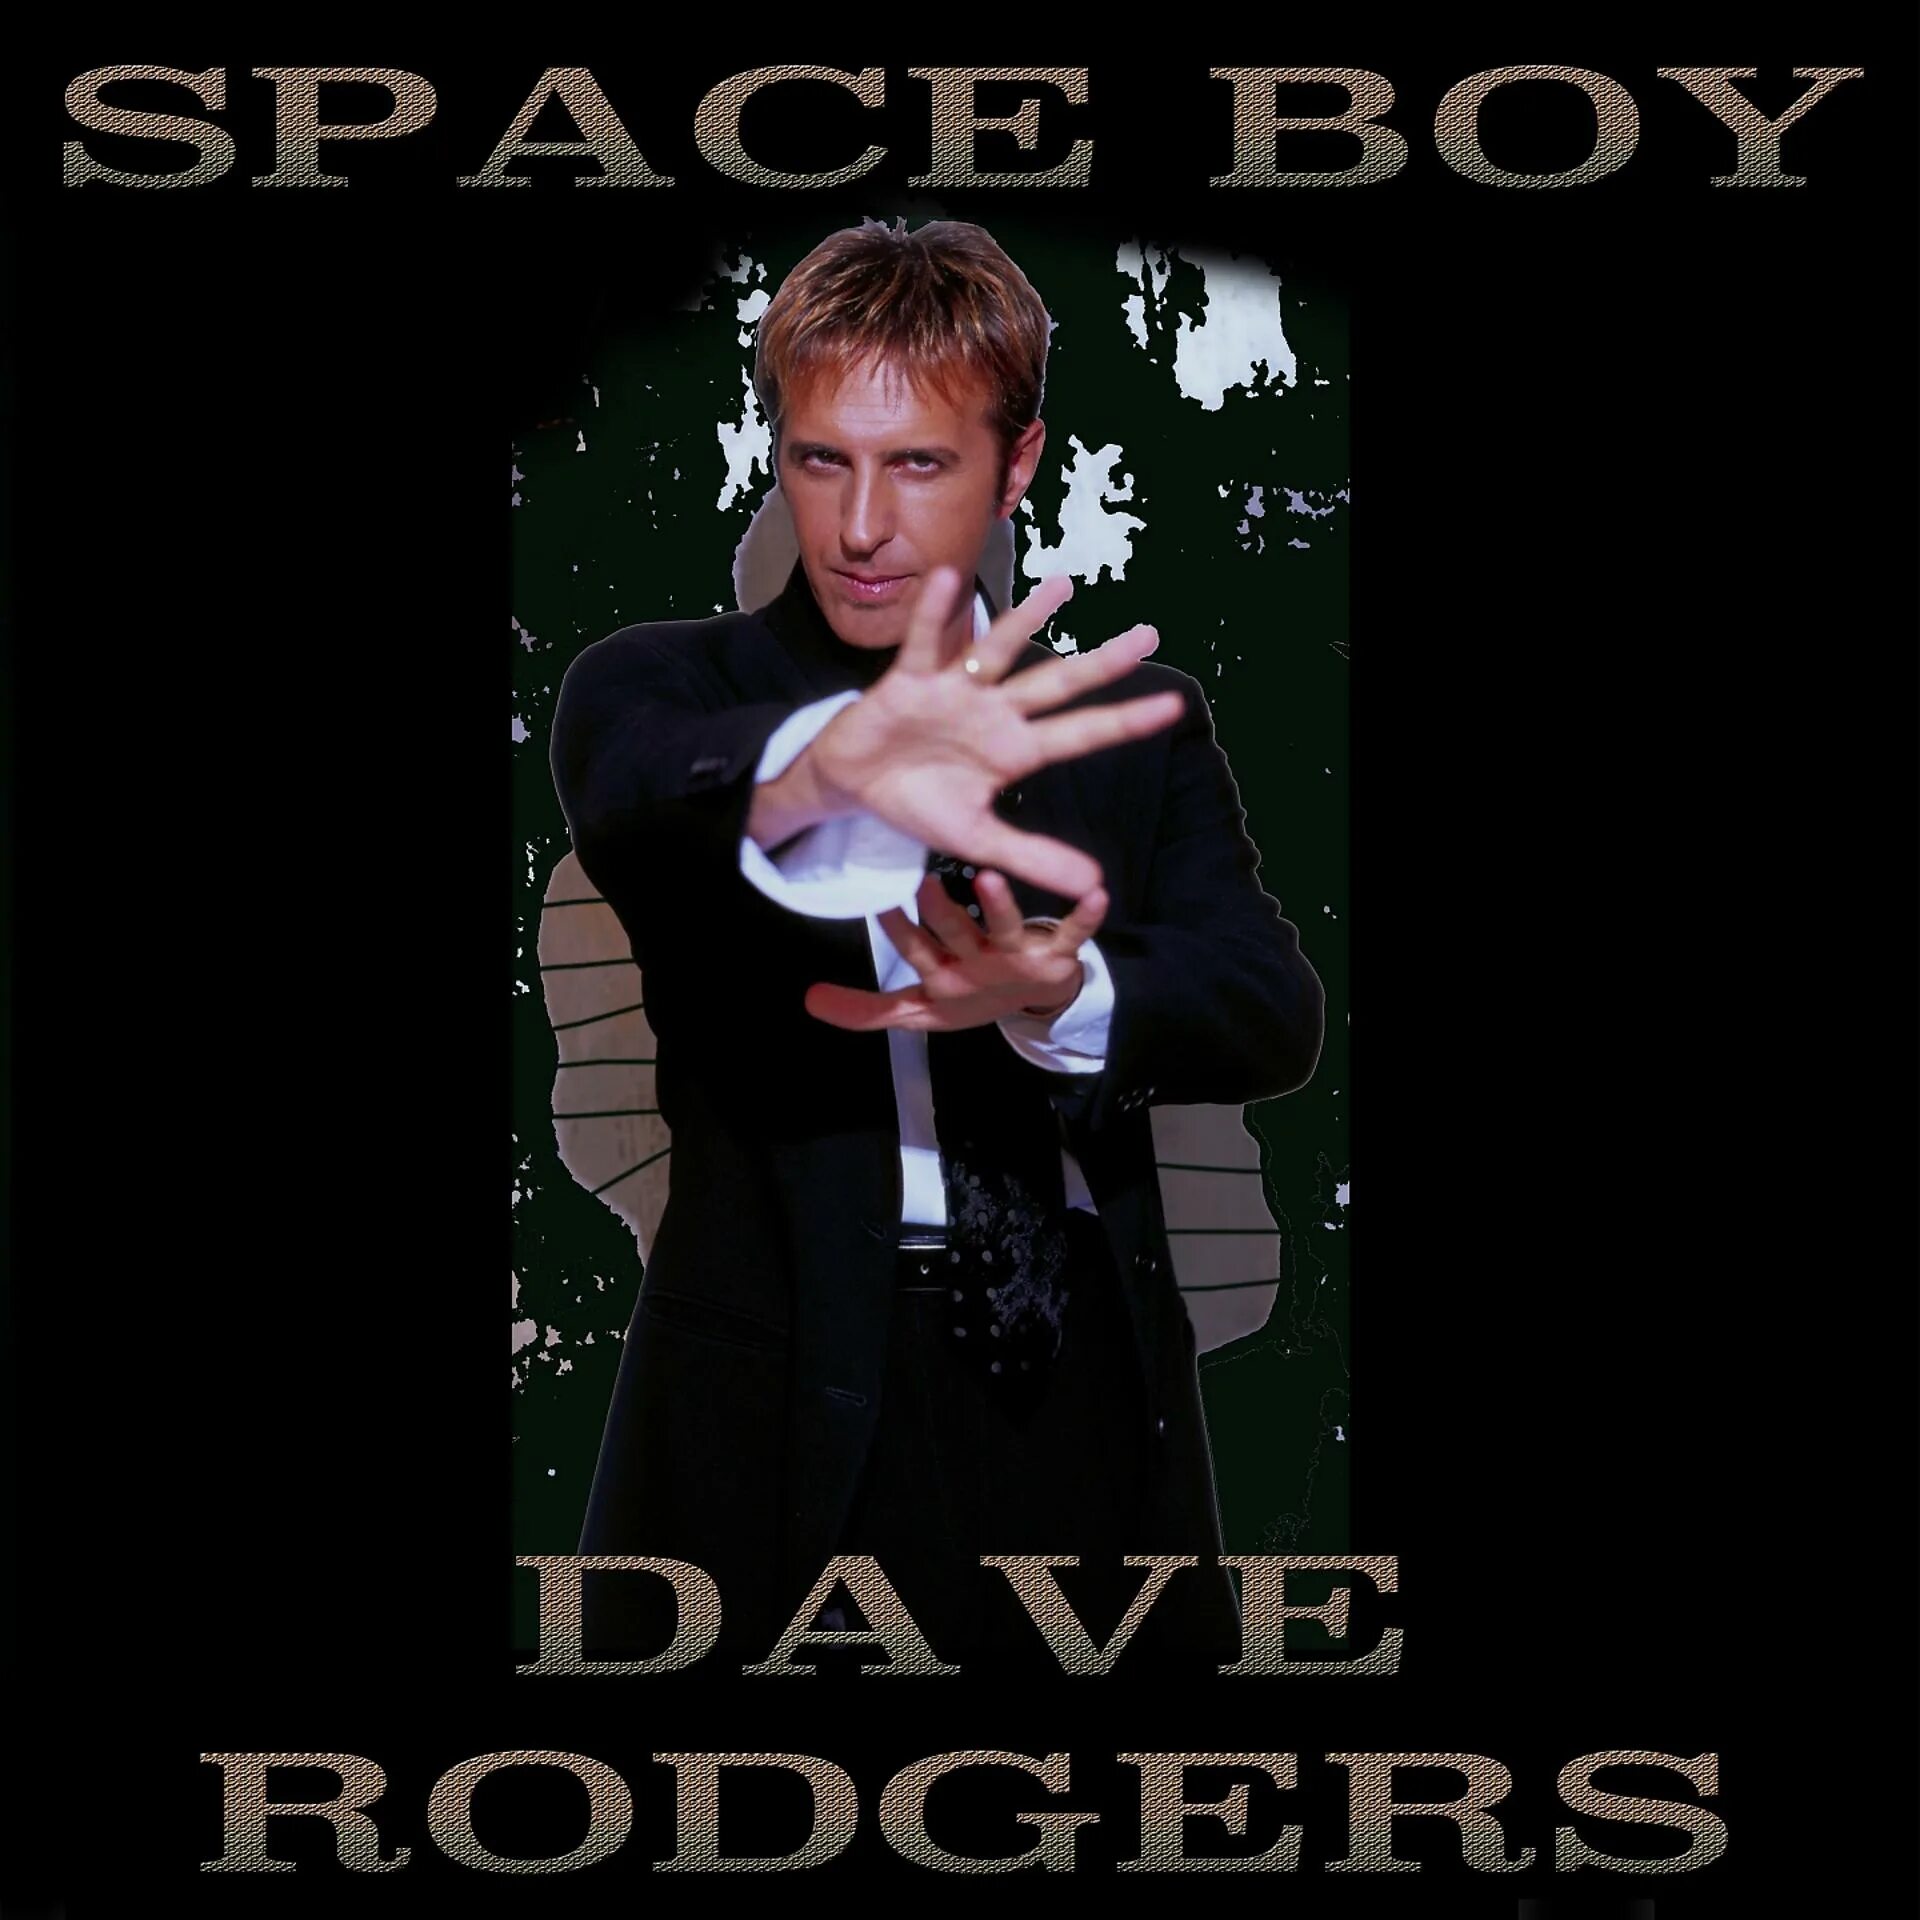 Dave rodgers deja vu. Dave Rodgers. Джанкарло Пасквини Dave Rodgers. Space boy Dave Rodgers. Dave Rodgers Gas.